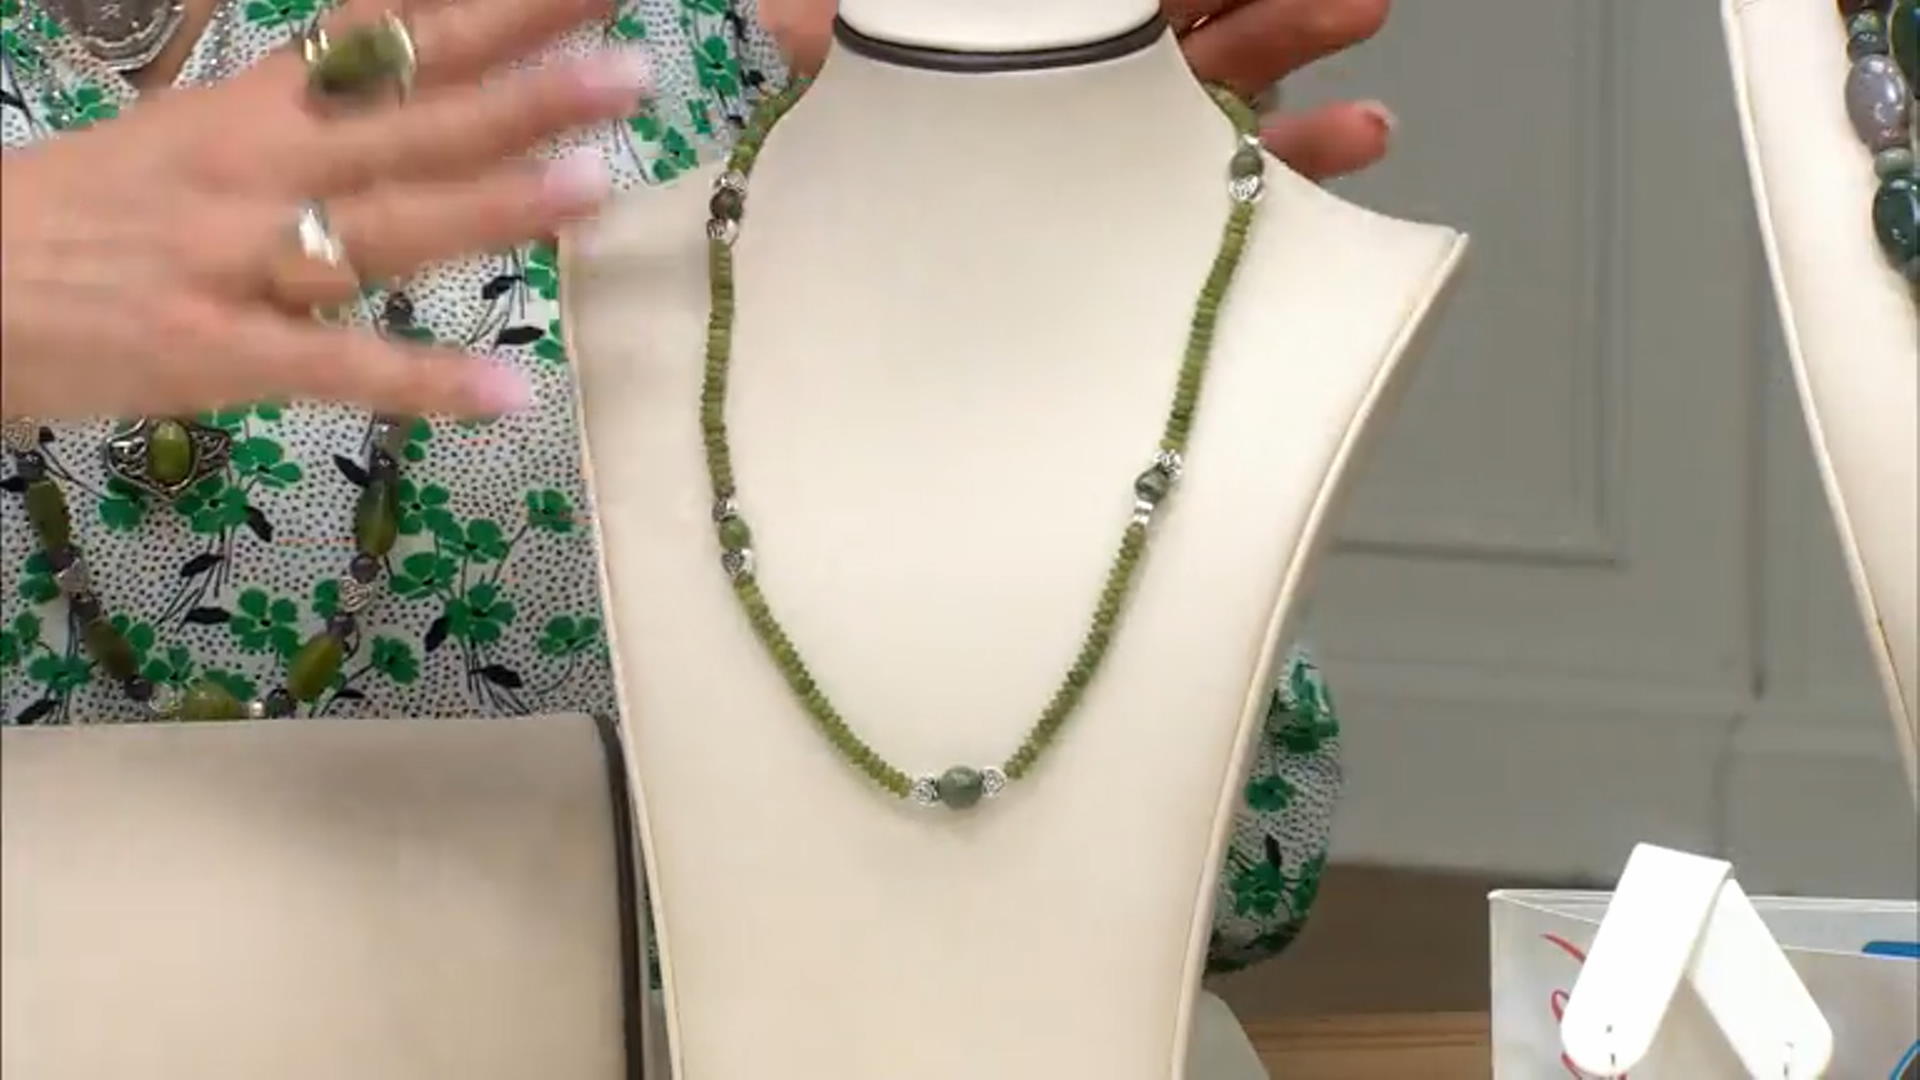 Silver Tone Connemara Marble Necklace, Earring, and Bracelet Set Video Thumbnail